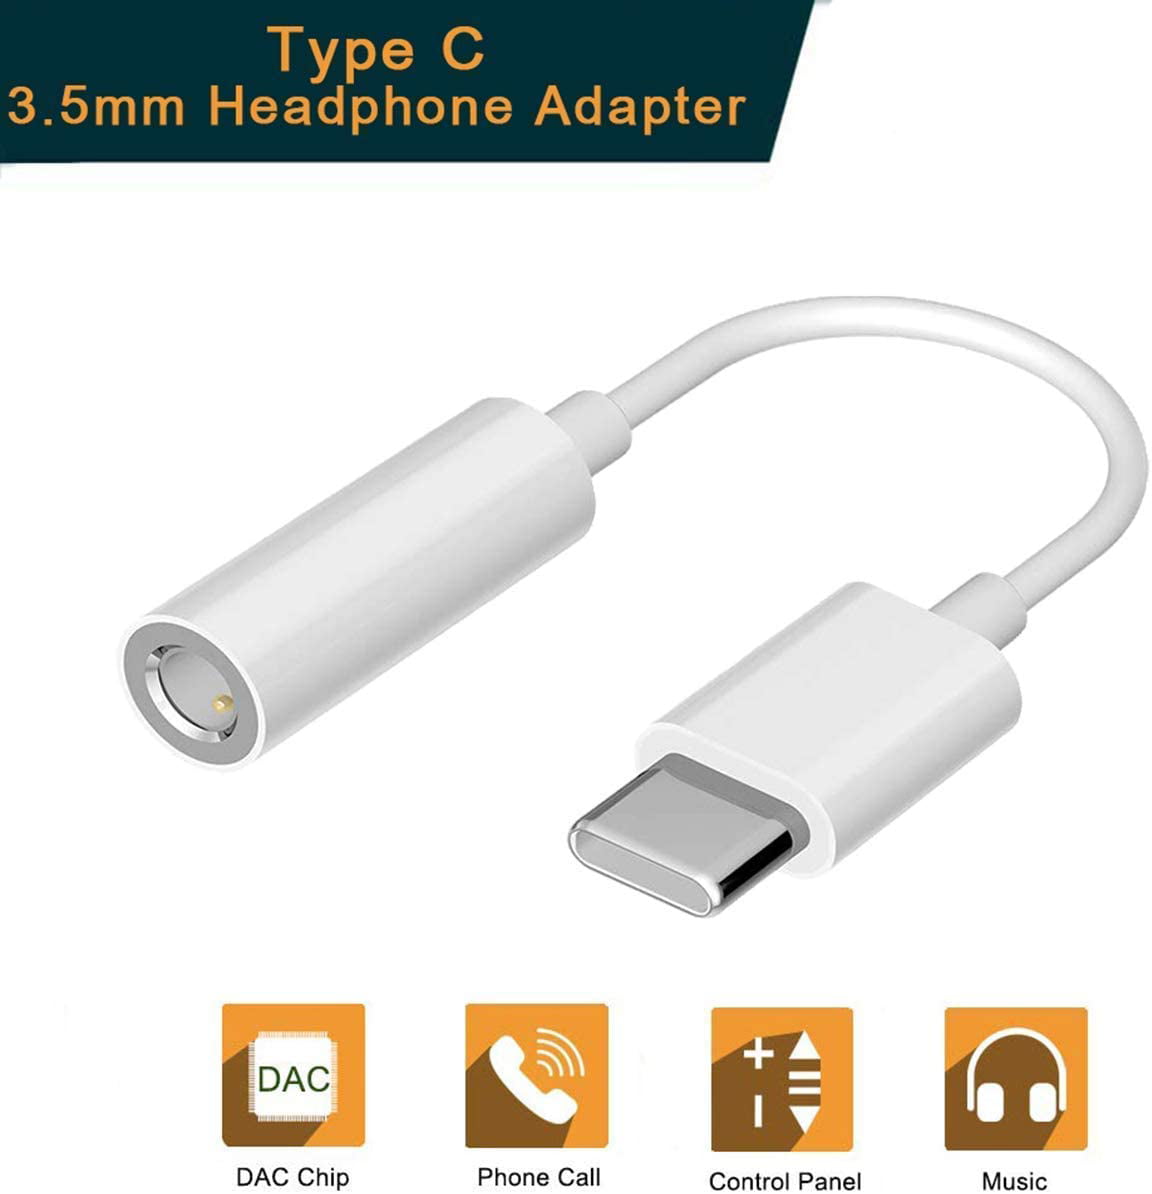 USB Type c to 3.5mm Headphone Jack Adapter Compatible with Pixel 4 3 2 XL//Samsung Galaxy Note 10//iPad Pro//HTC U11//One Plus 6T//Huawei and More USB C to Headphone Adapter 2 Pack